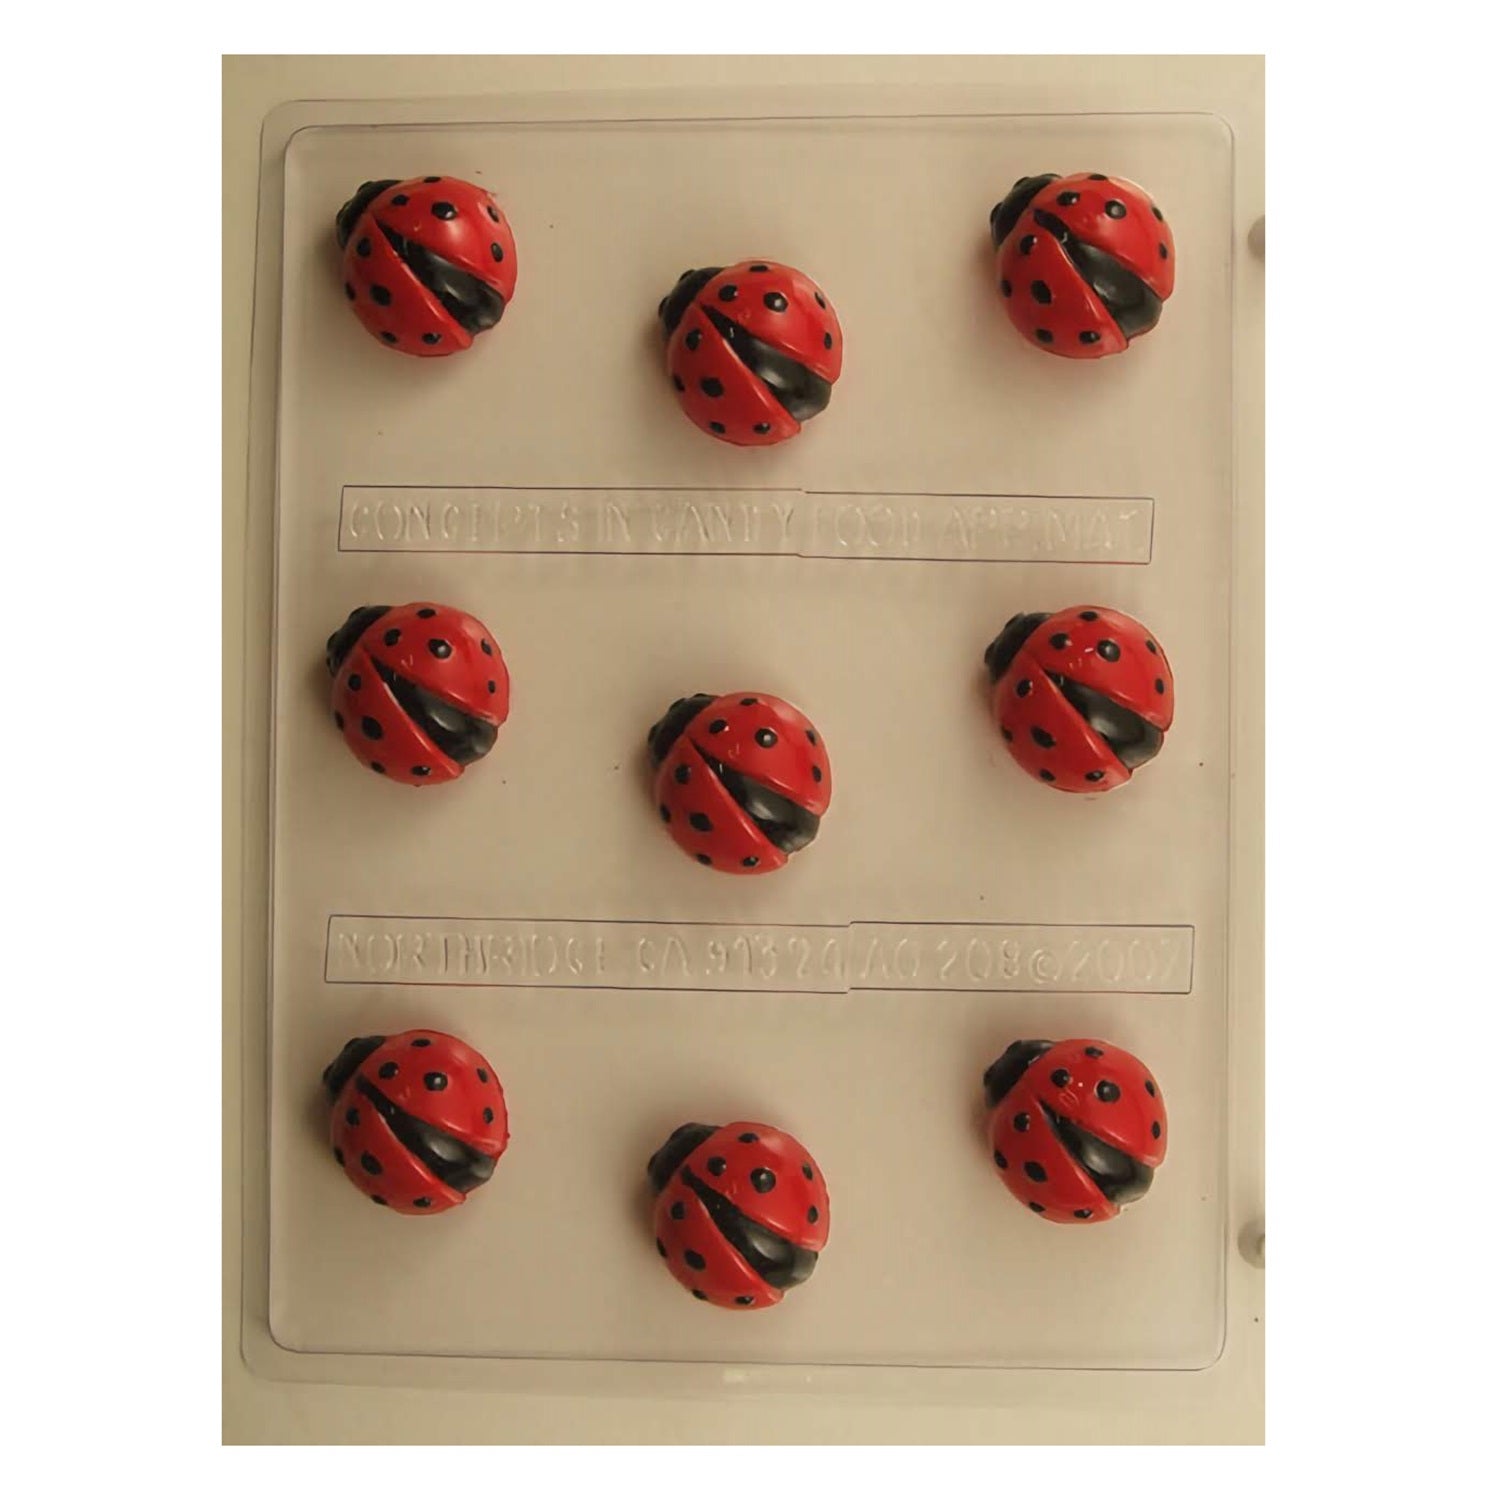 A detailed chocolate mold designed to create realistic ladybug truffles, featuring the iconic red and black spotted shell, suitable for garden parties or as a springtime confectionery delight.